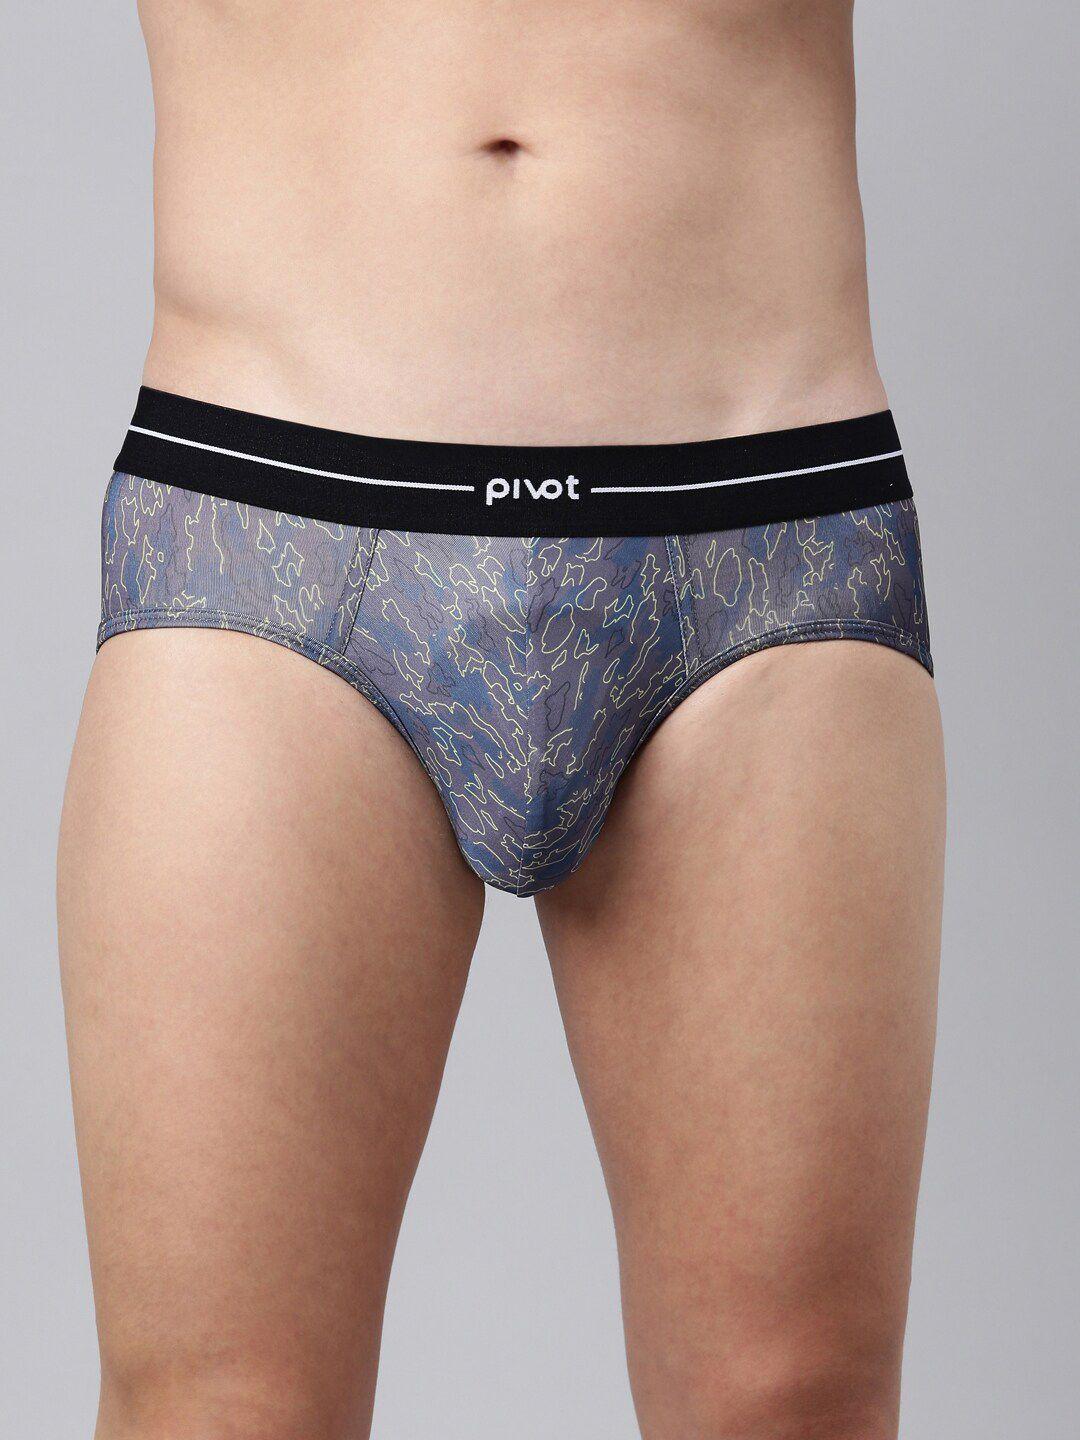 pivot-men-mid-rise-abstract-printed-basic-briefs